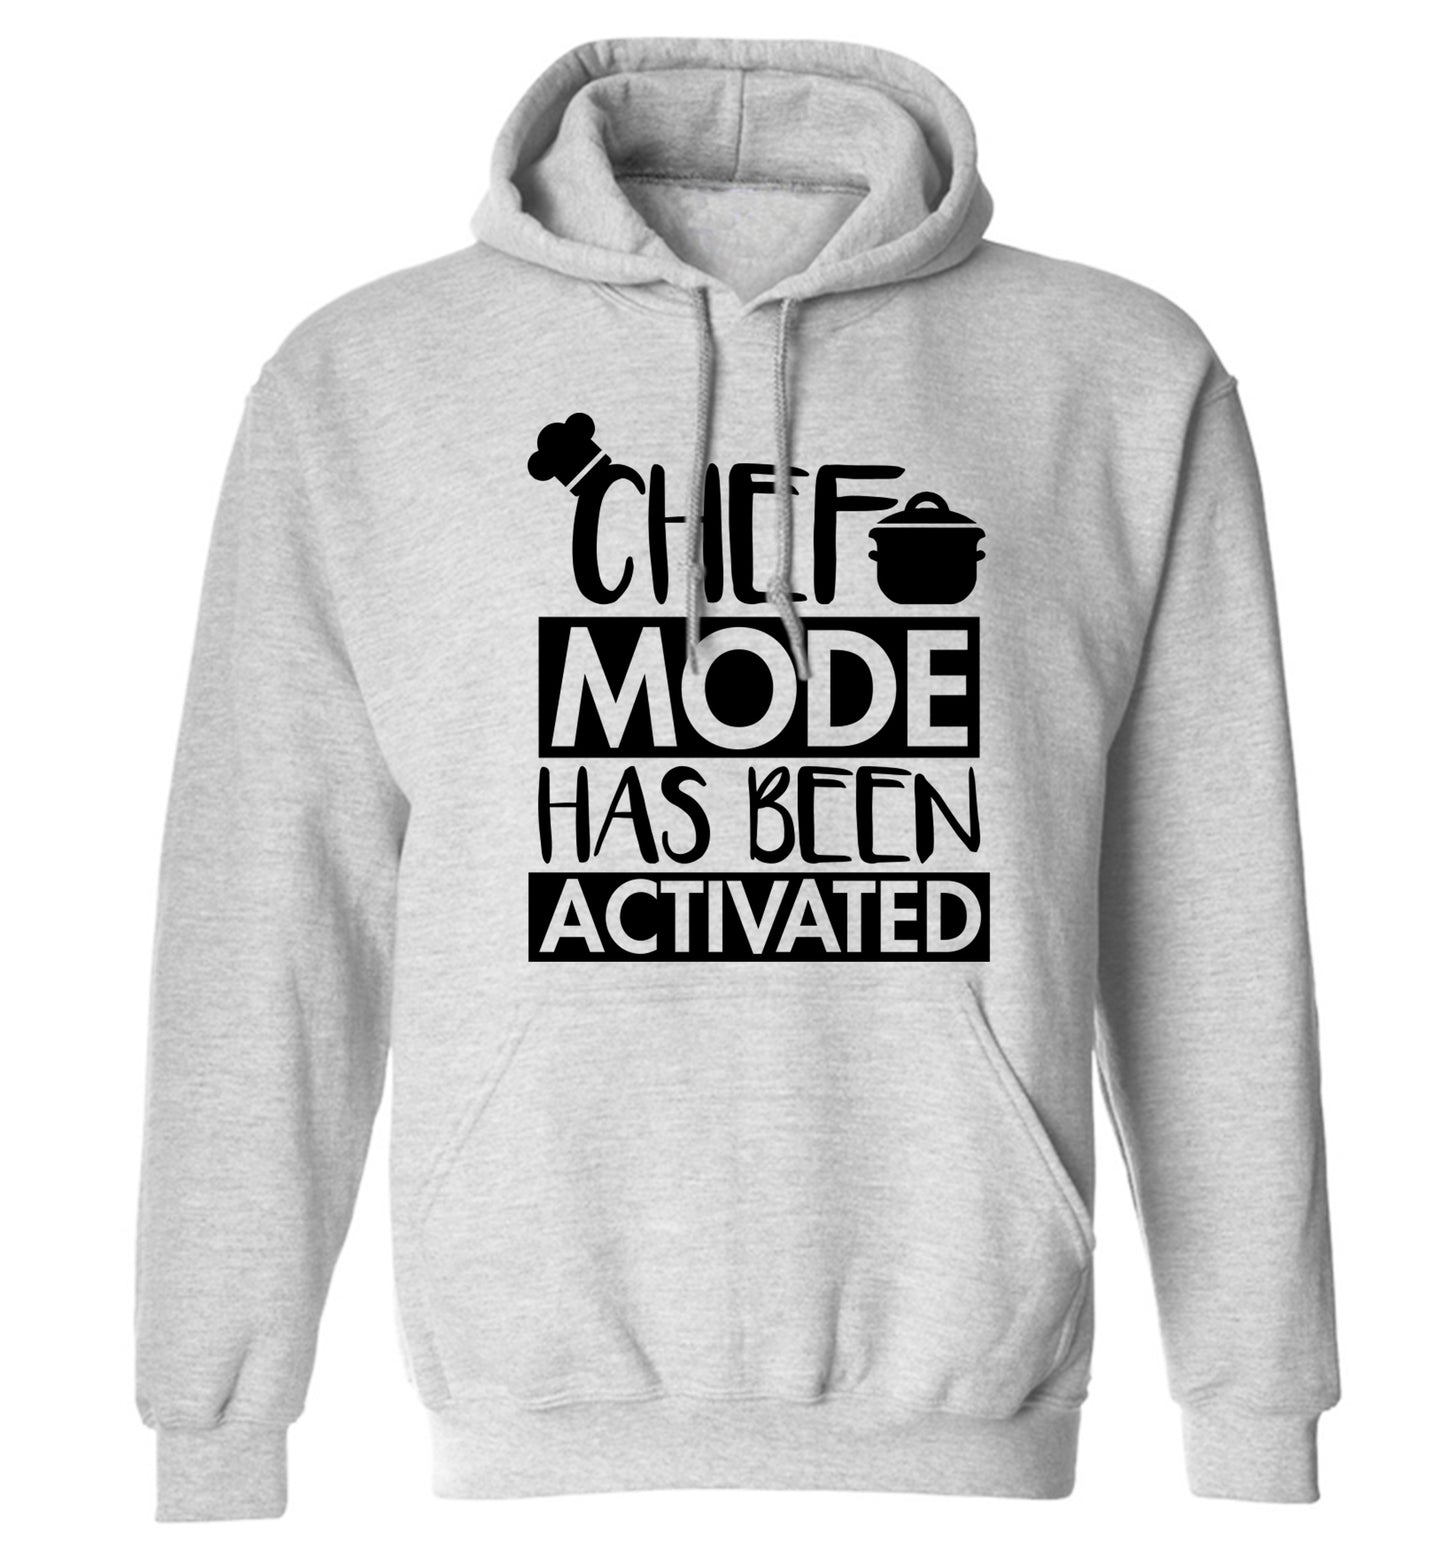 Chef mode has been activated adults unisex grey hoodie 2XL